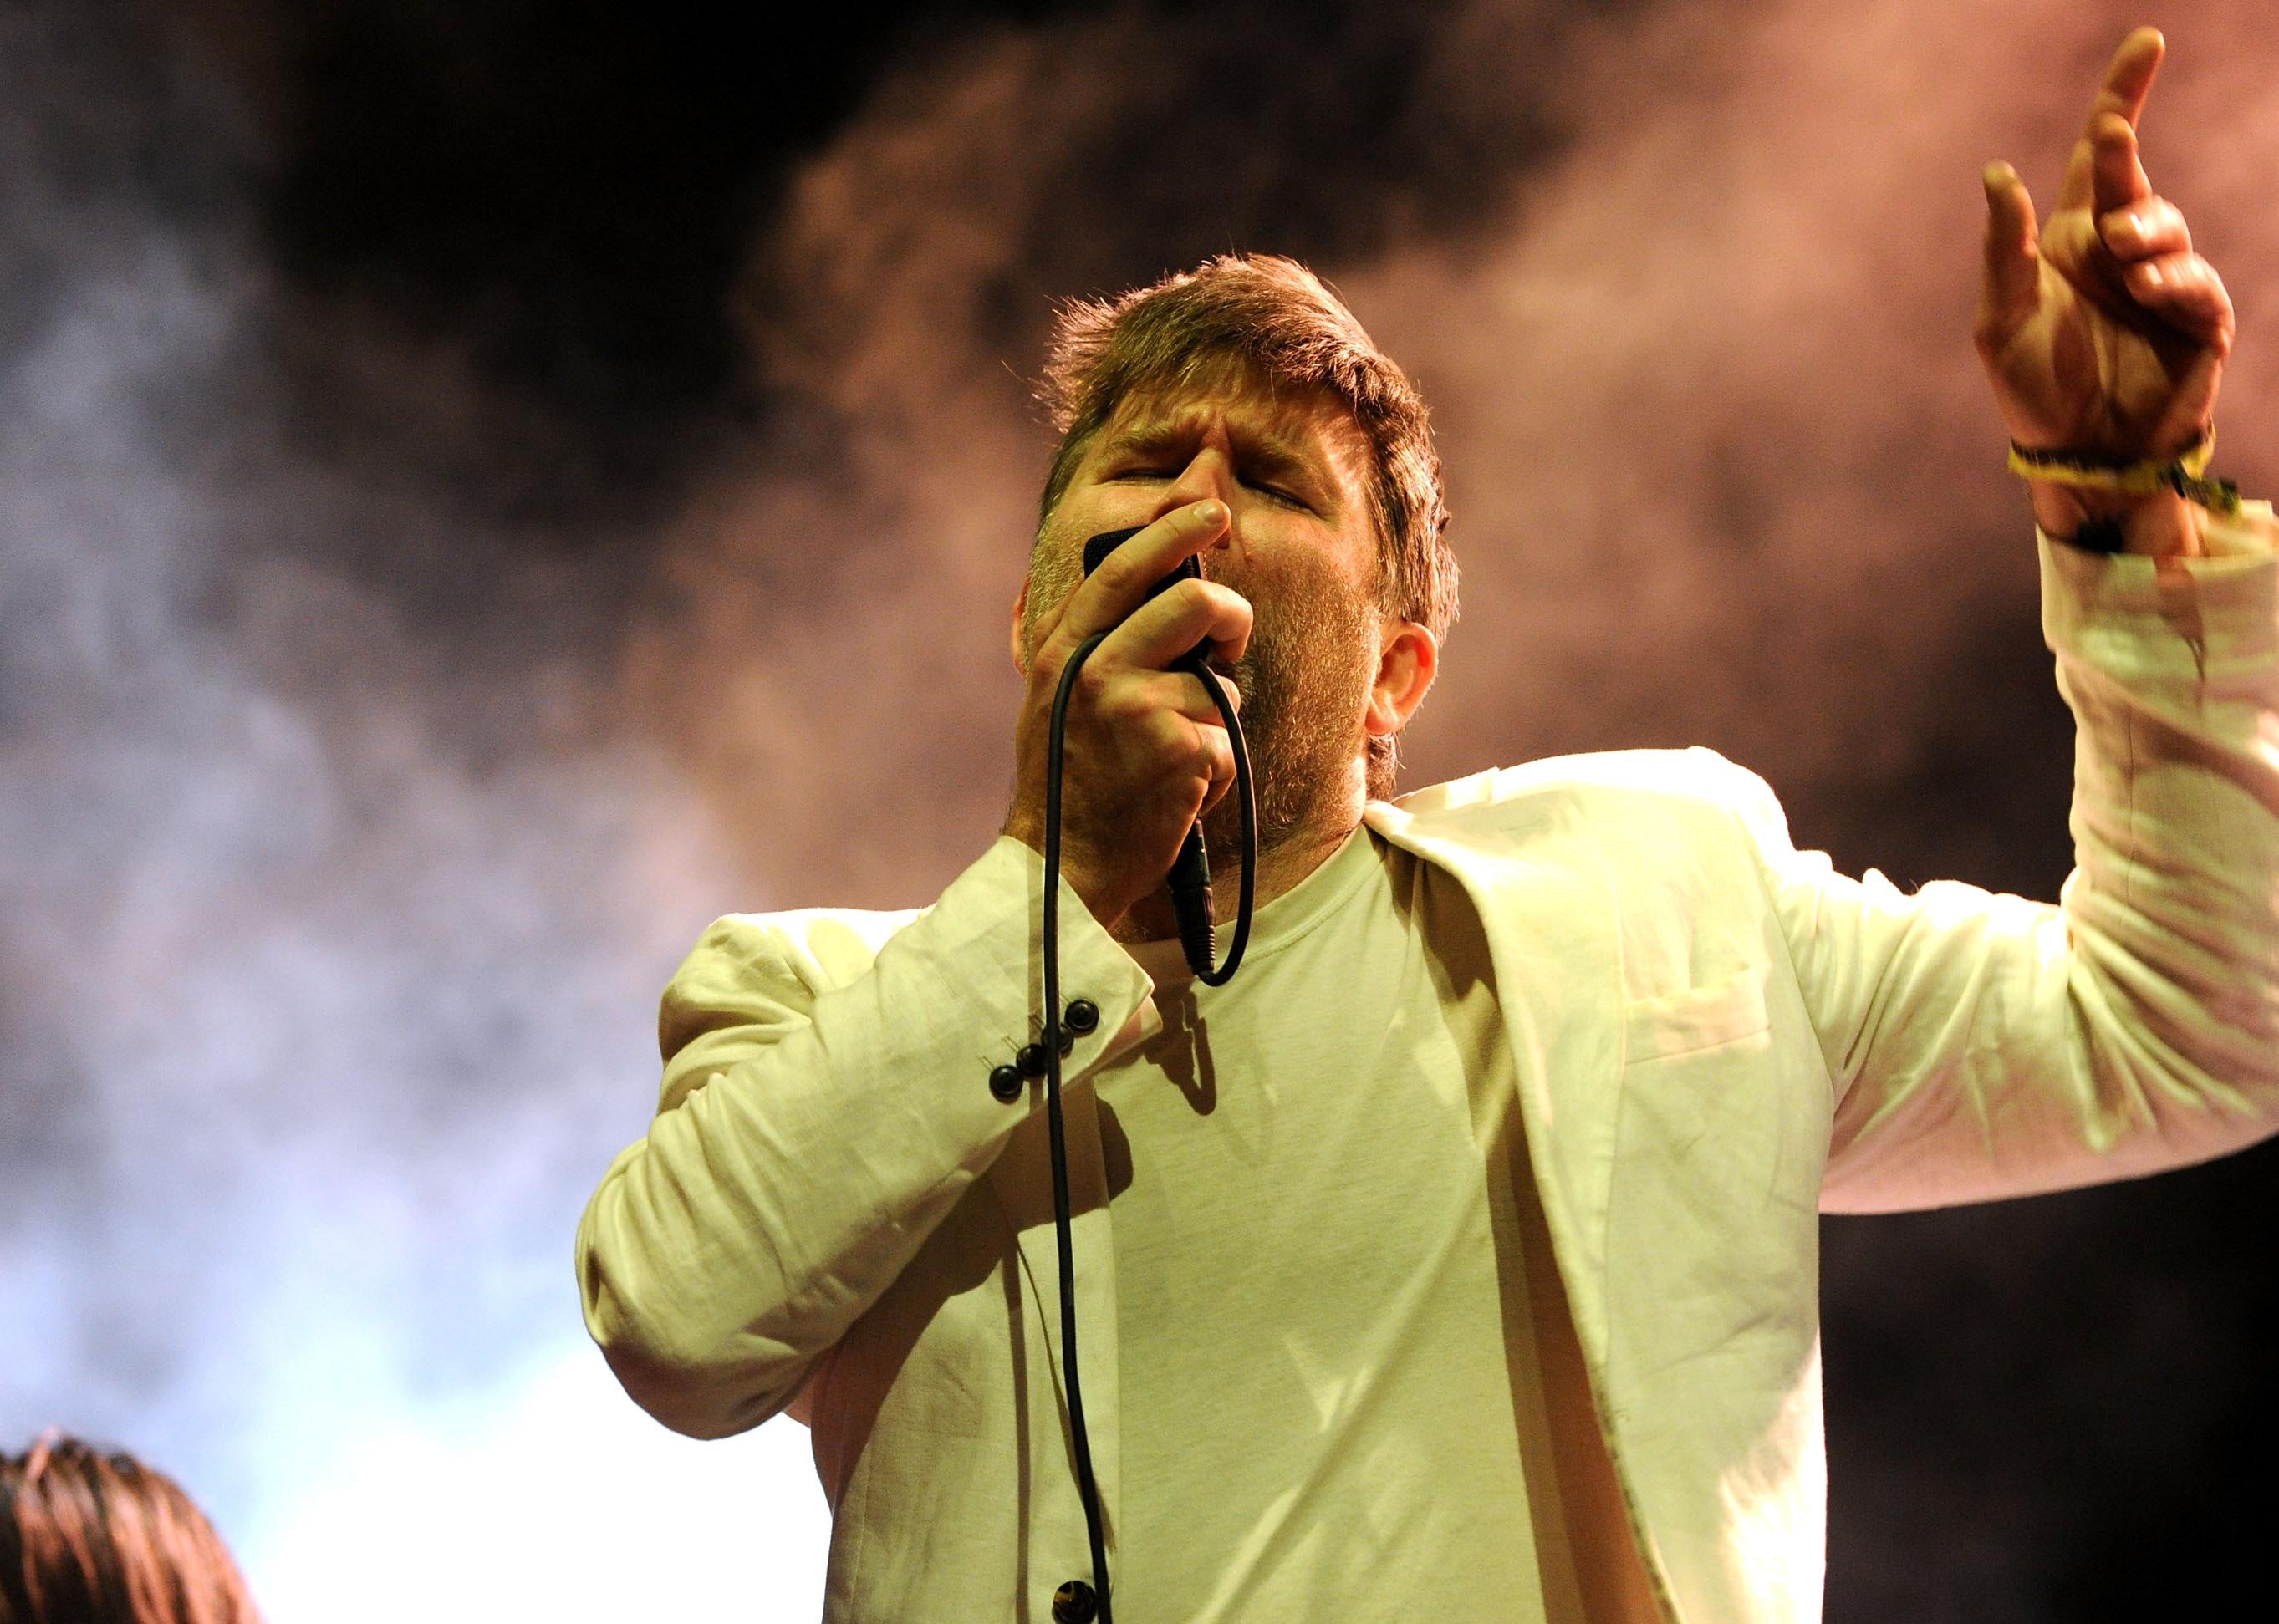 James Murphy of LCD Soundsystem sings onstage